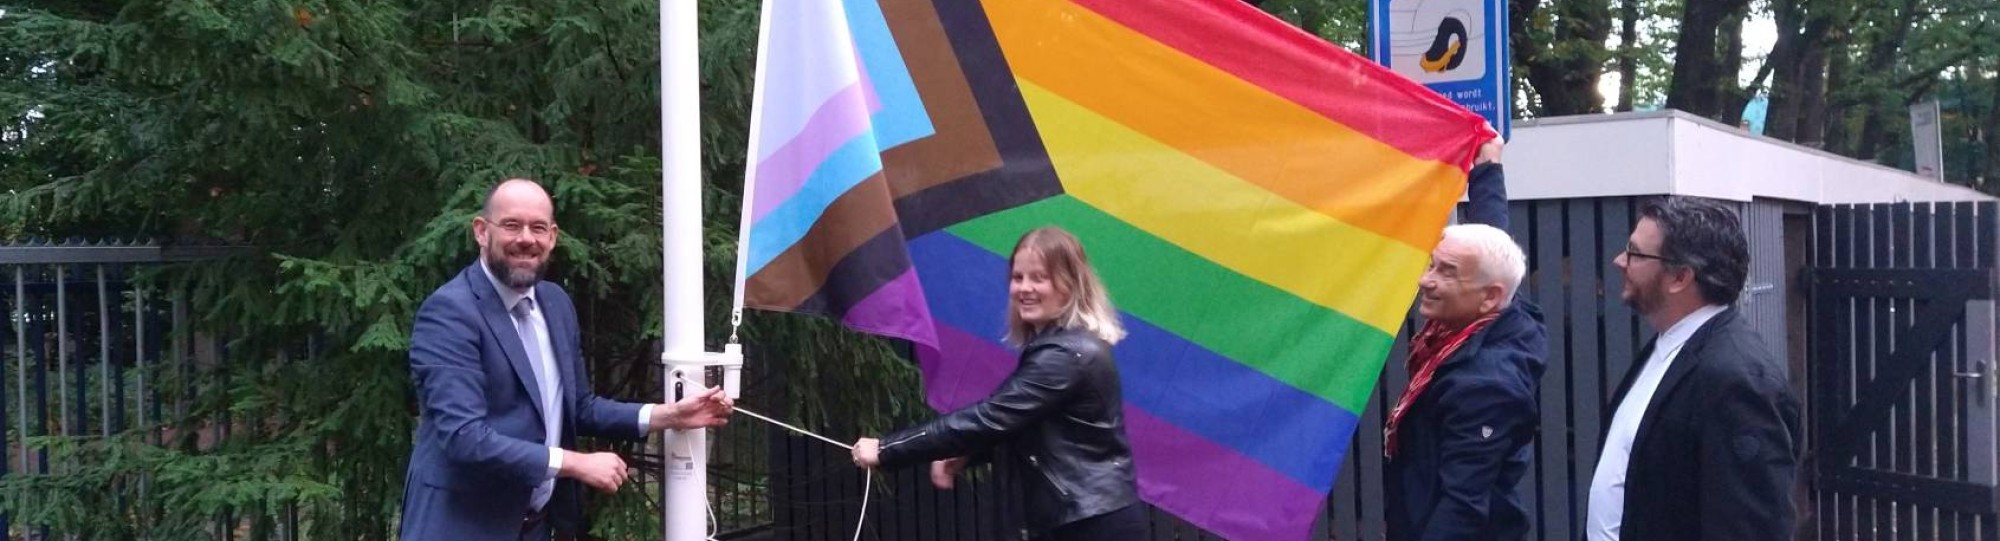 339319 hijsen pride vlag, coming out day